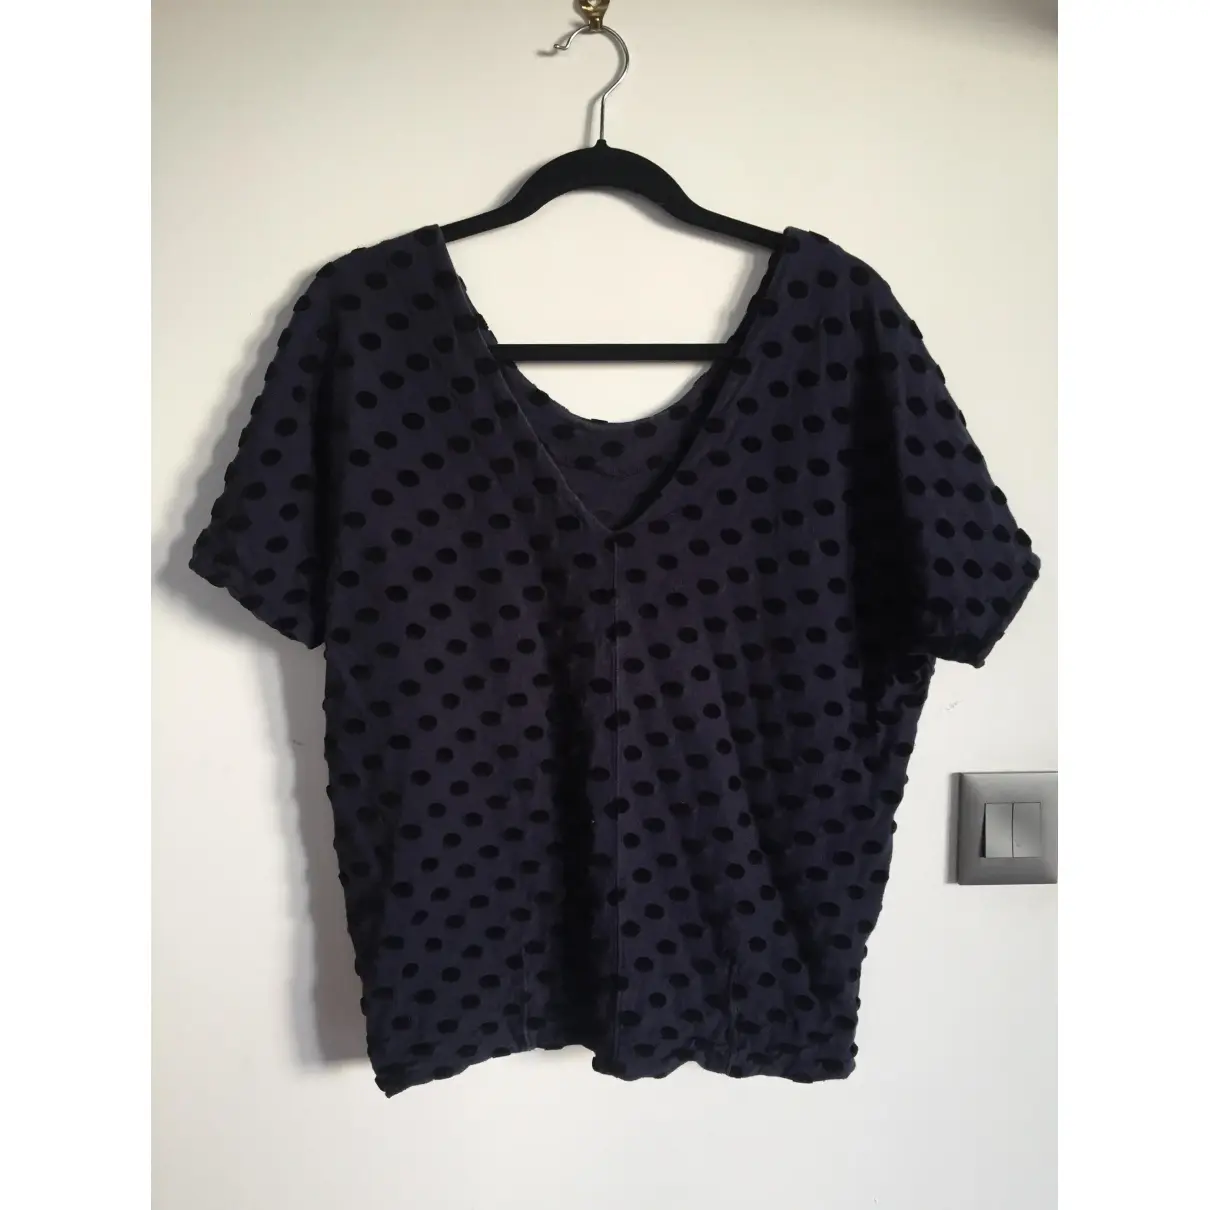 Buy Marc by Marc Jacobs Navy Cotton Top online